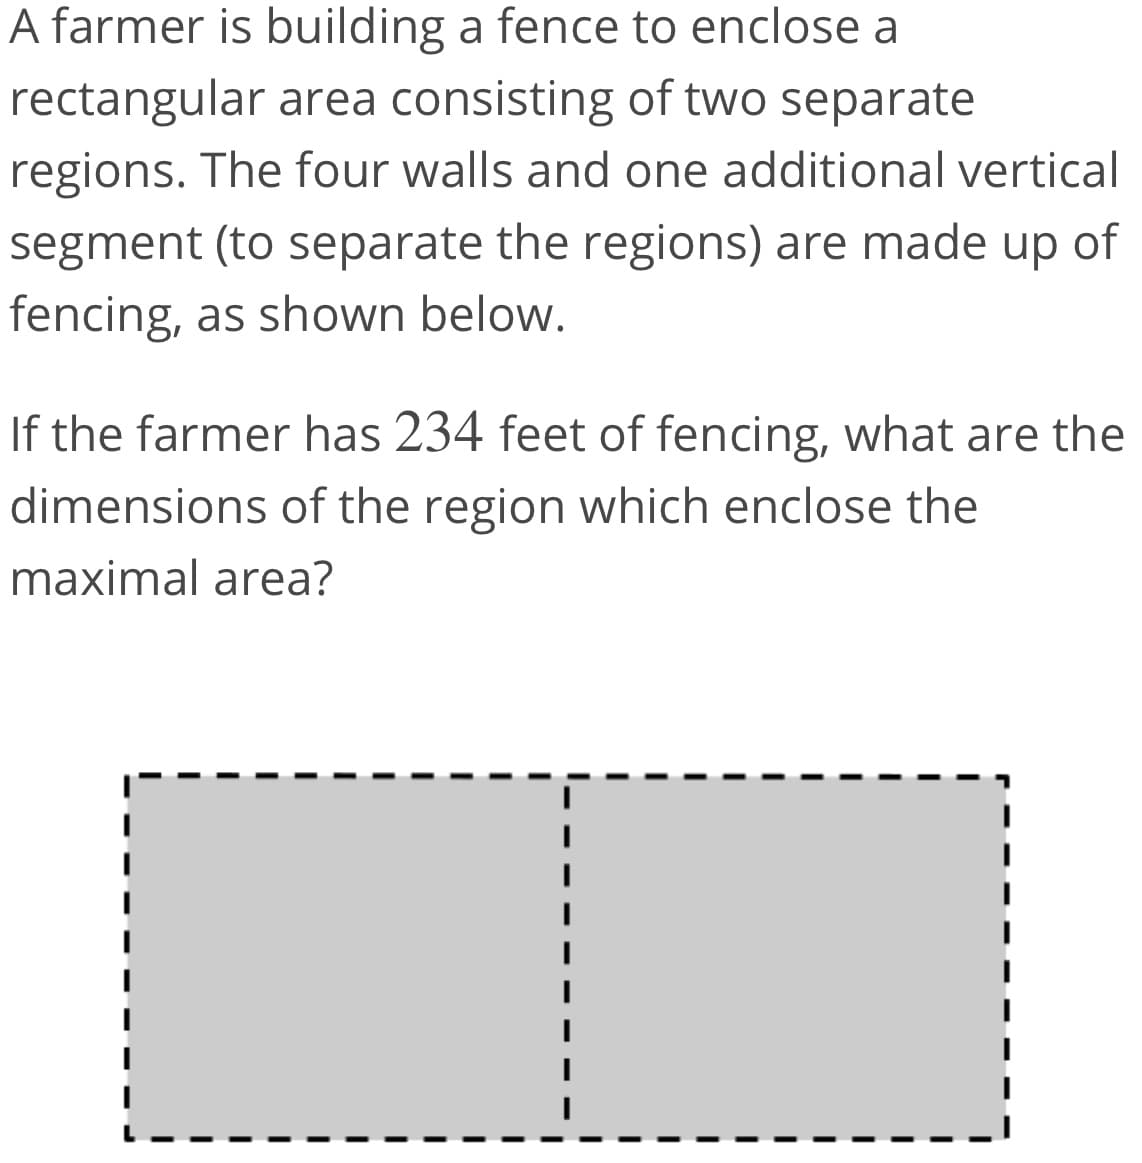 A farmer is building a fence to enclose a
rectangular area consisting of two separate
regions. The four walls and one additional vertical
segment (to separate the regions) are made up of
fencing, as shown below.
If the farmer has 234 feet of fencing, what are the
dimensions of the region which enclose the
maximal area?
